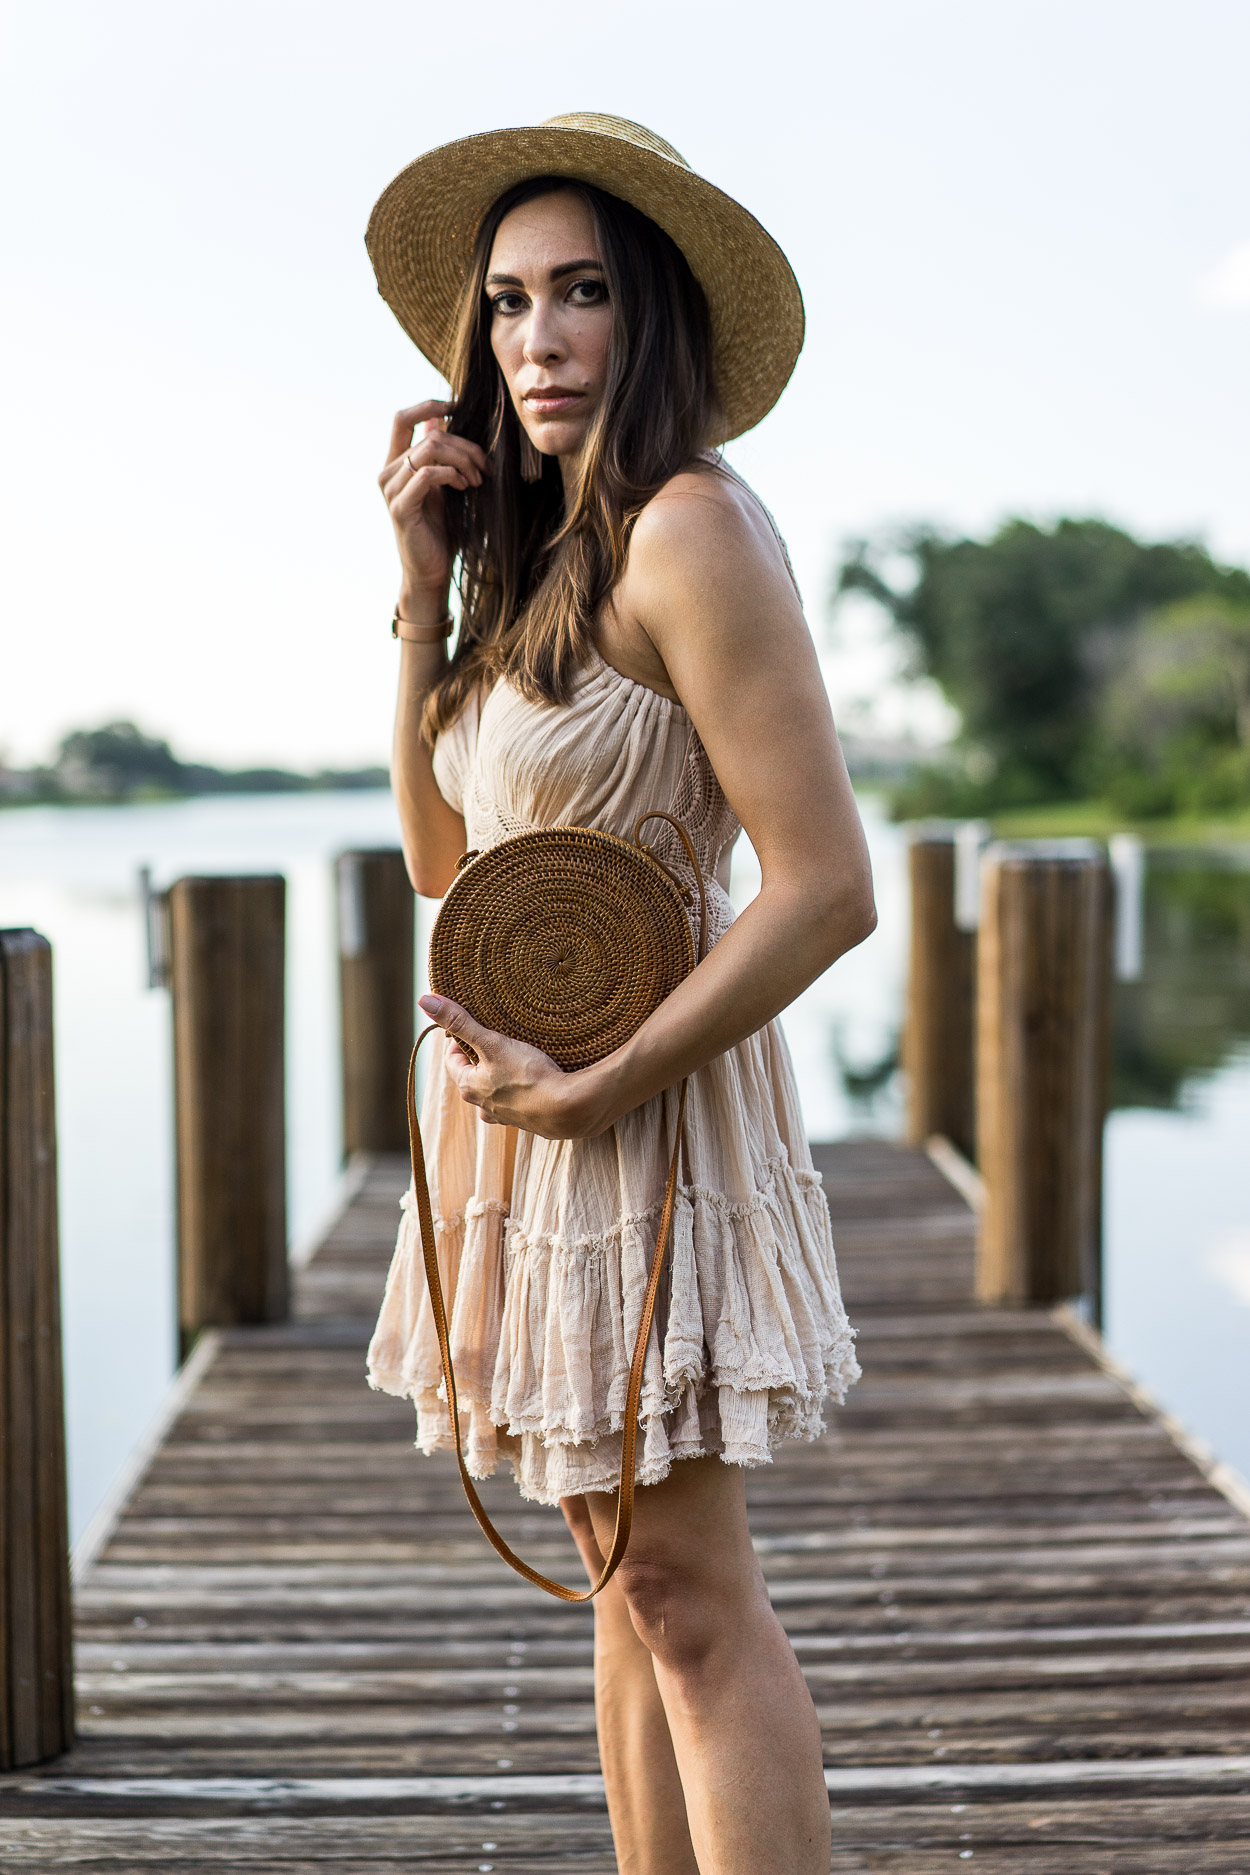 Summer calls for a Free People boho dress like this 200 Degrees Mini dress styled by Amanda of AGlamLifestyle blog with a round basket bag and Rag and Bone straw boater hat